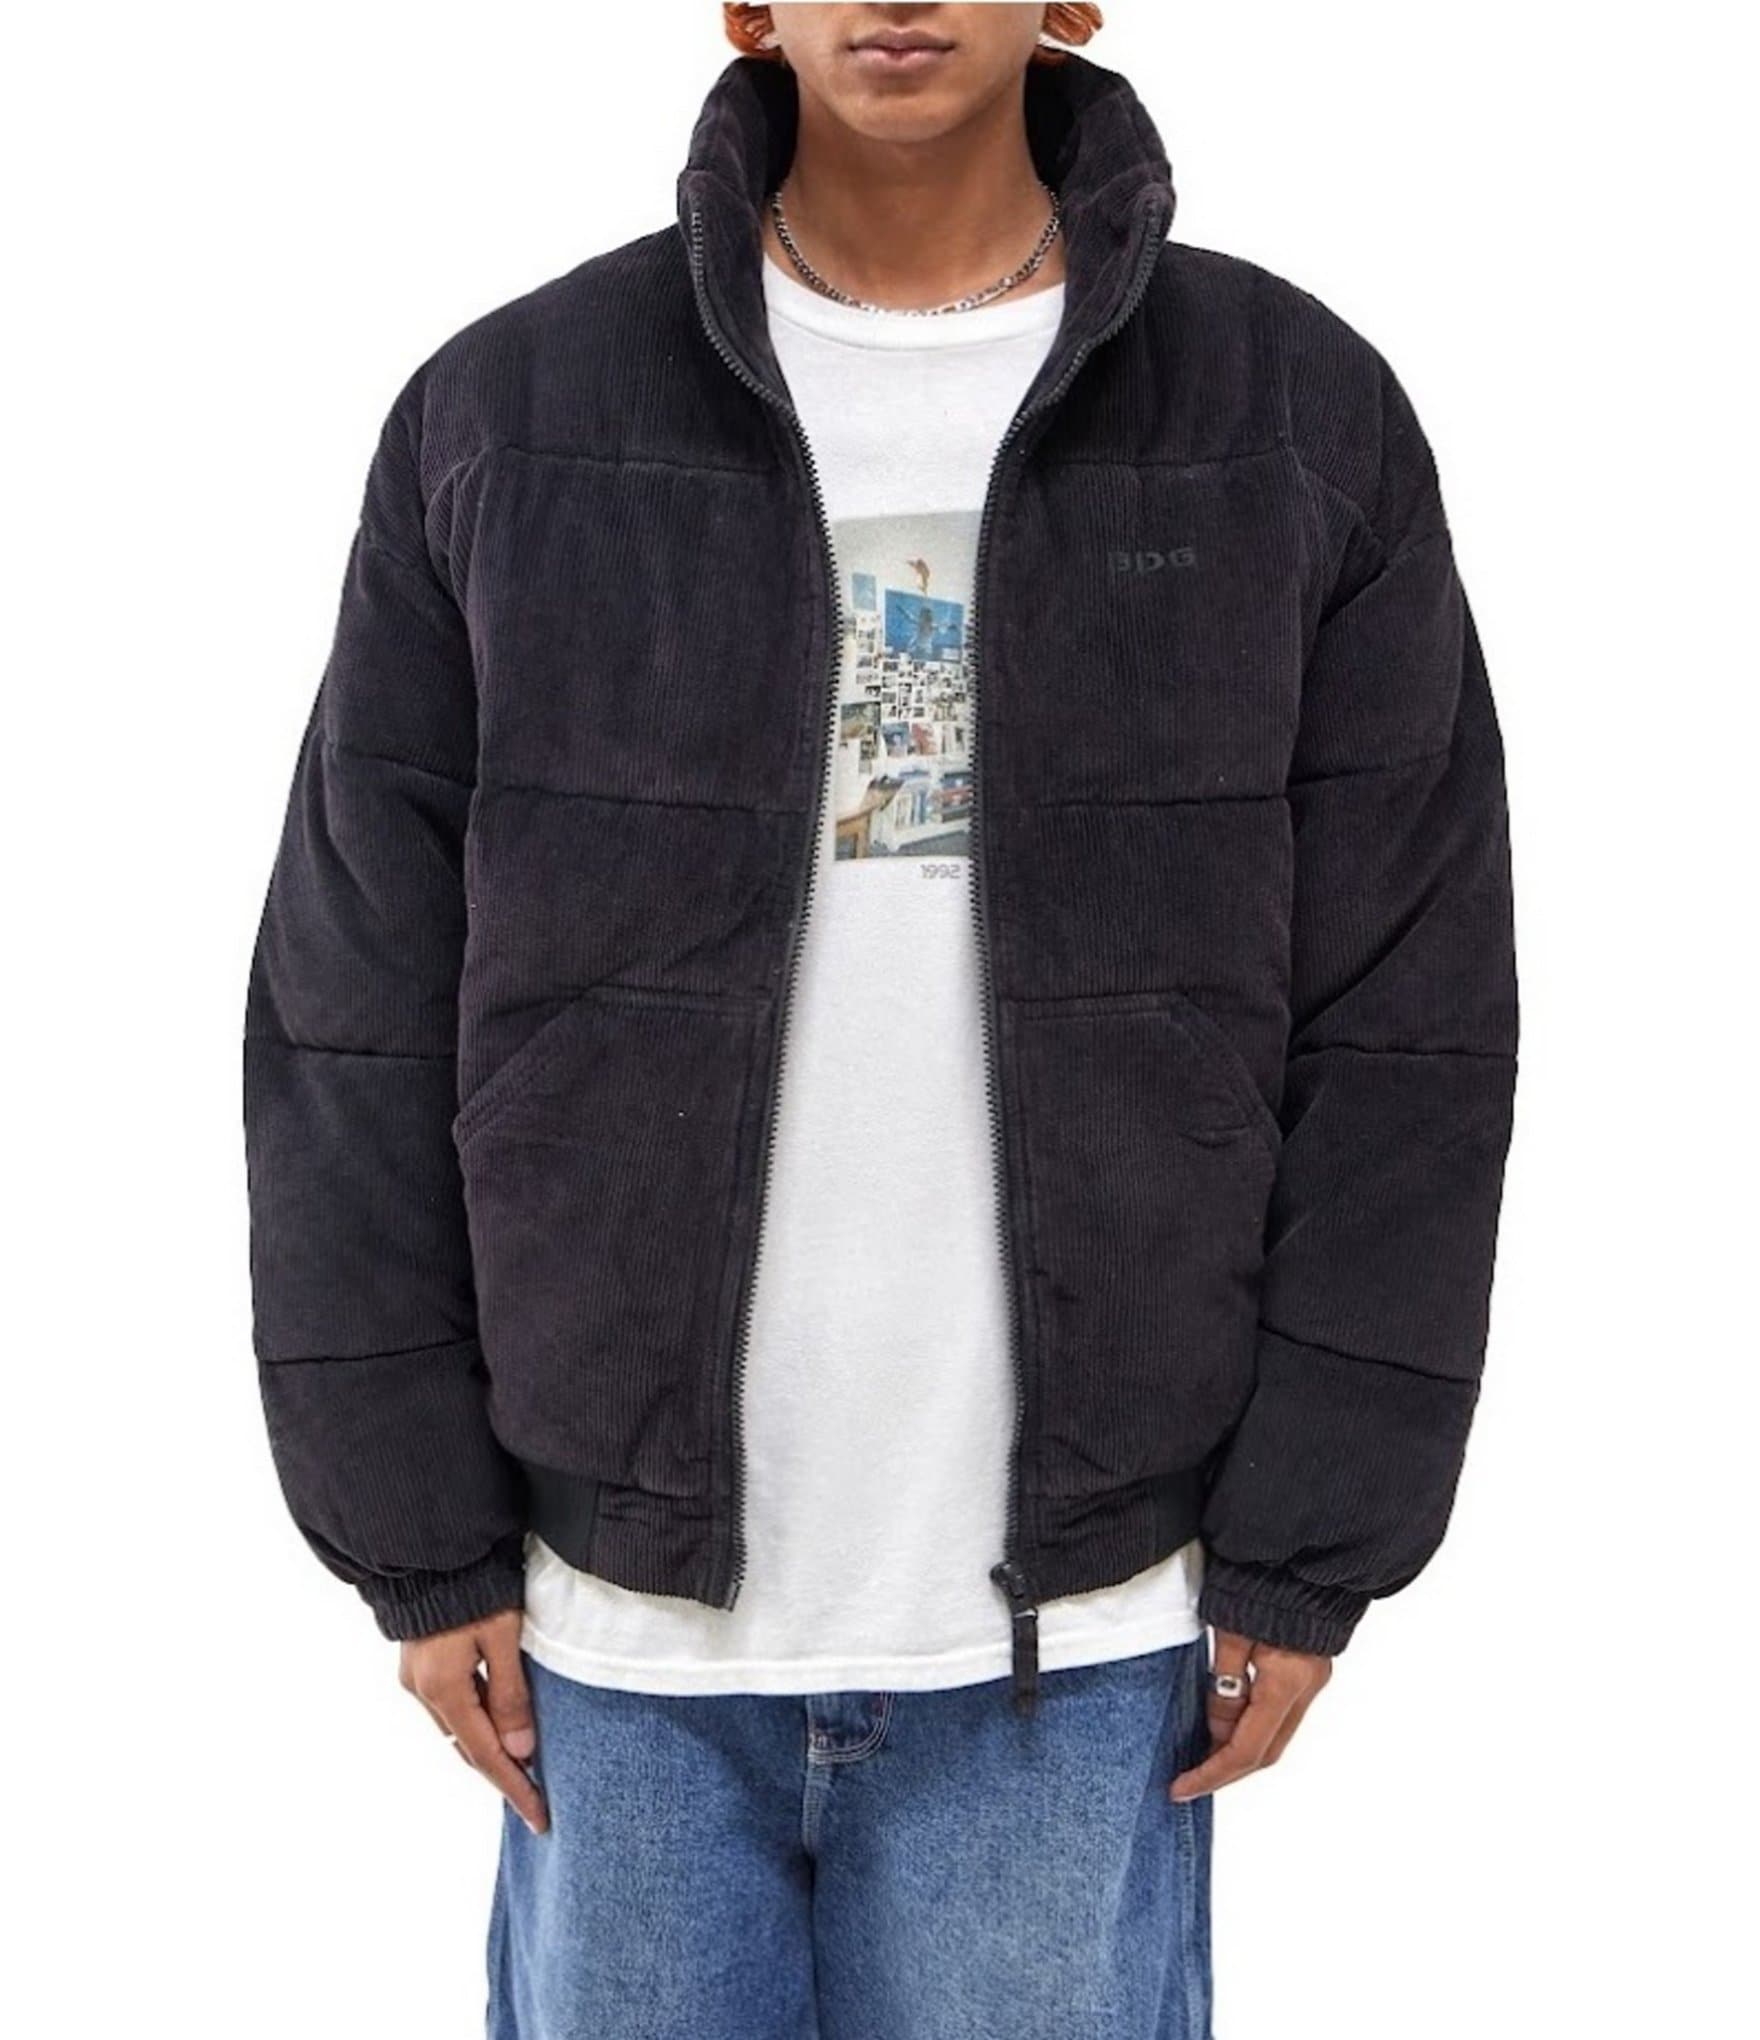 Corduroy Urban Outfitters Jacket | Out Dillard\'s Puffer Sleeve BDG Long